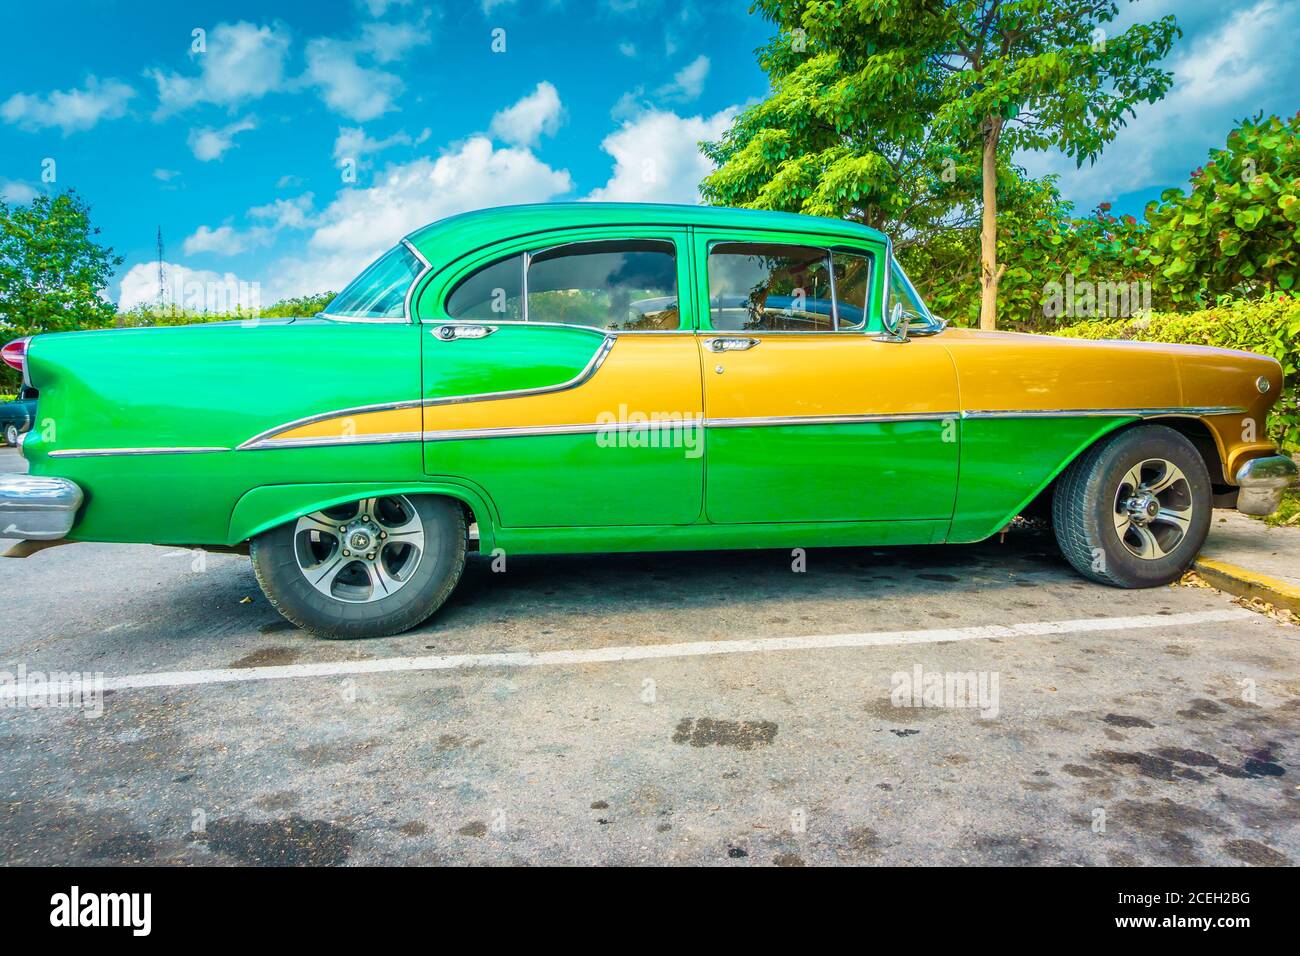 Cuba, February 2016 - Green Classic vintage American car parked on a road in Cuba.  Stock Photo